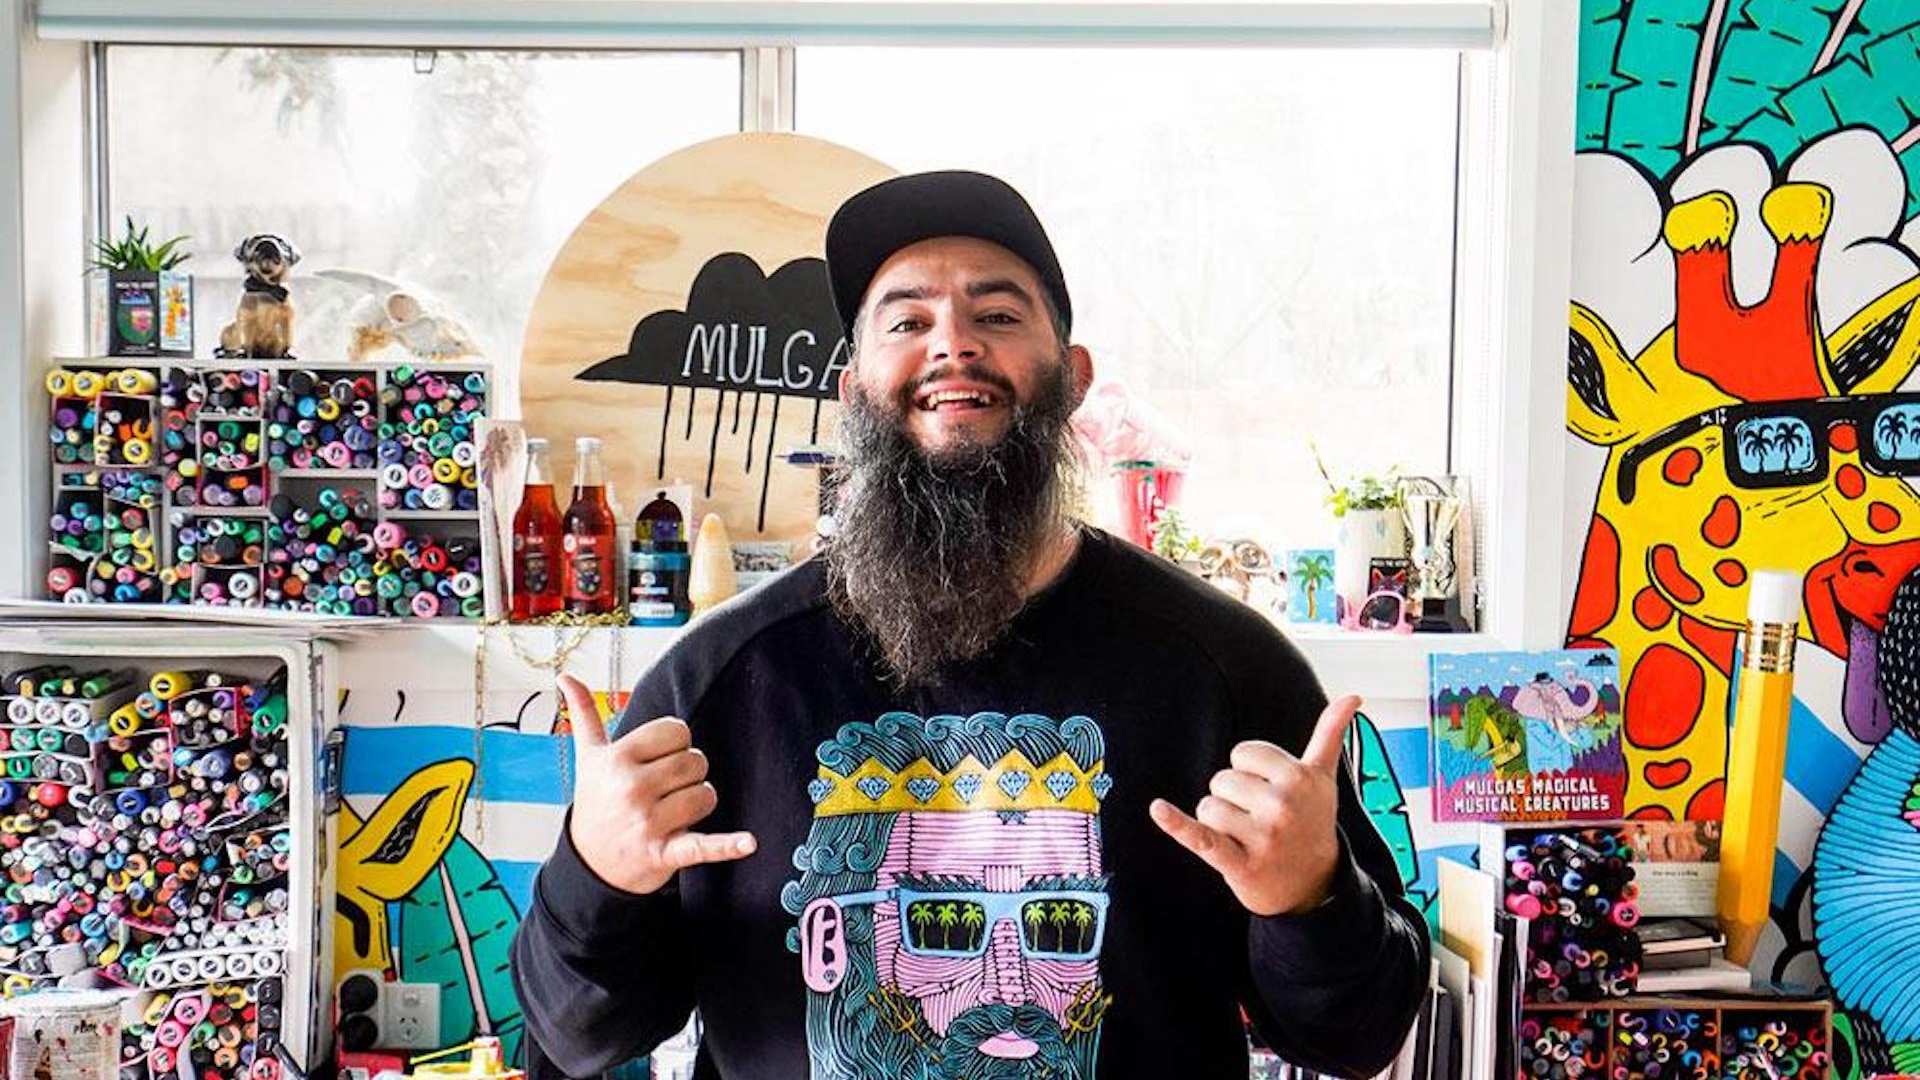 Bearded Dudes and Surfing Koalas: A Look Into the Colourful World of Mulga the Artist and His Plans for Summer